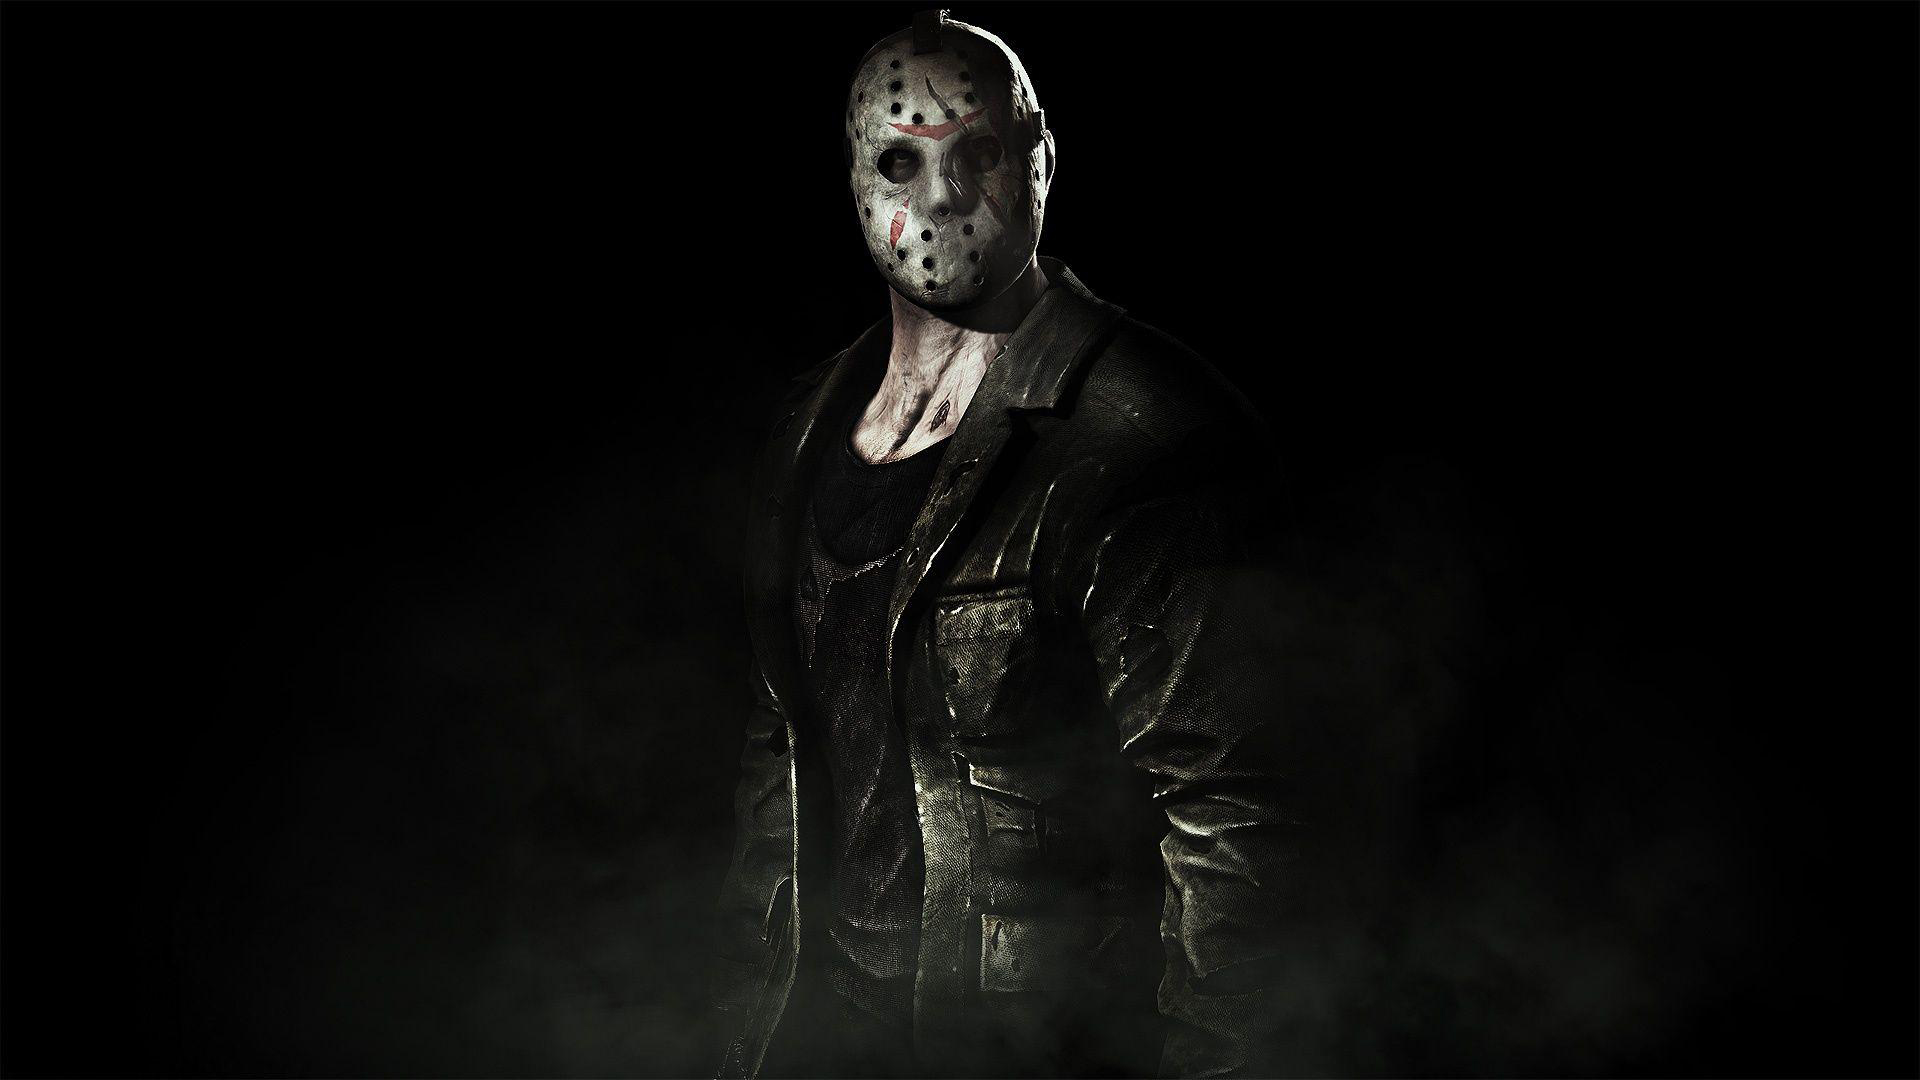 2000x1599 Resolution Jason Voorhees Friday The 13th 2000x1599 ...